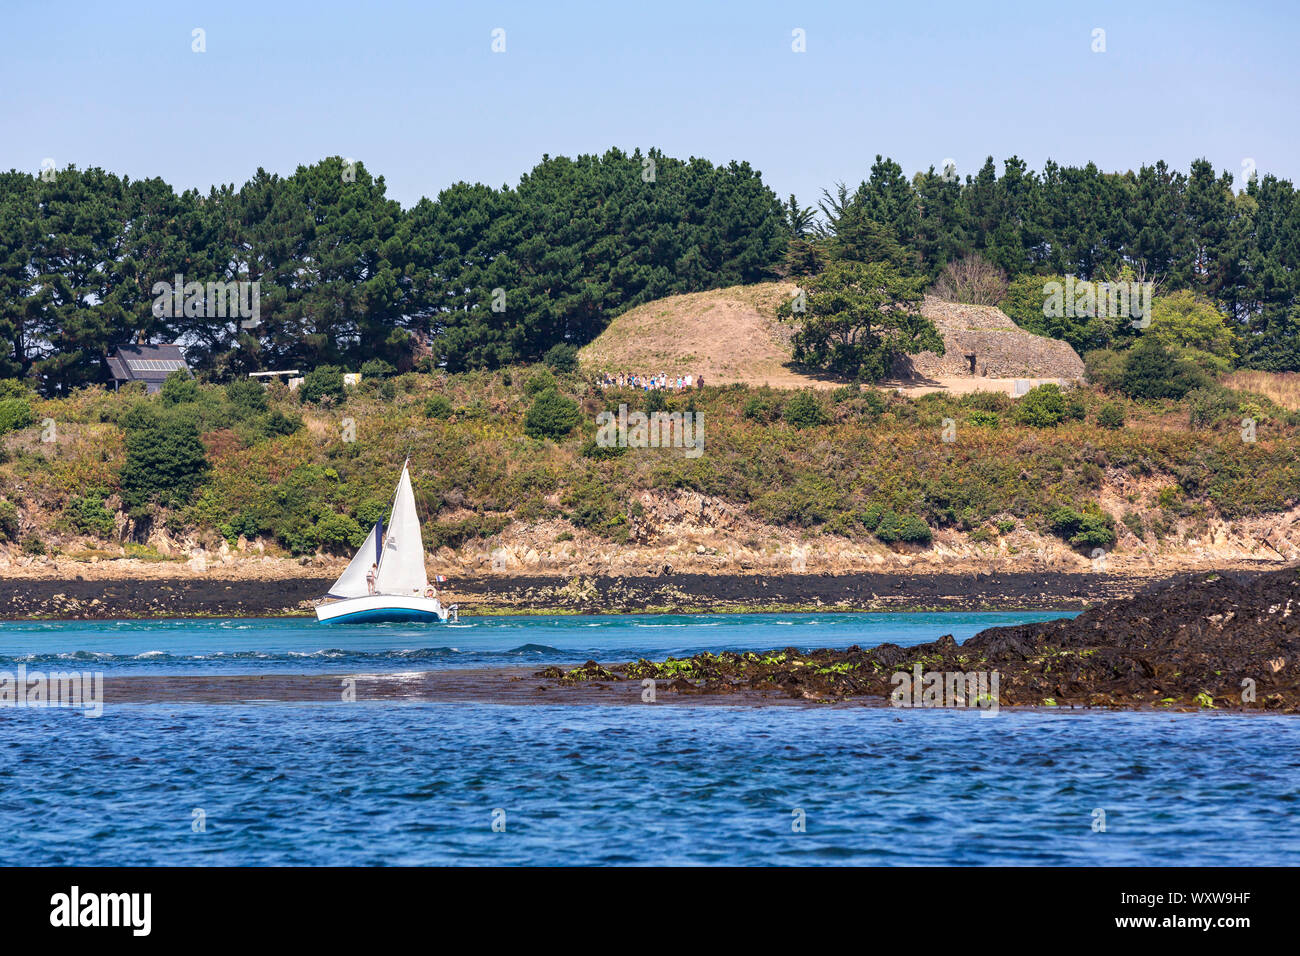 Cairn of the Island of Gavrinis in Larmor Baden in the Gulf of Morbihan (Brittany, north-western France). Sailboat in front of the island Stock Photo